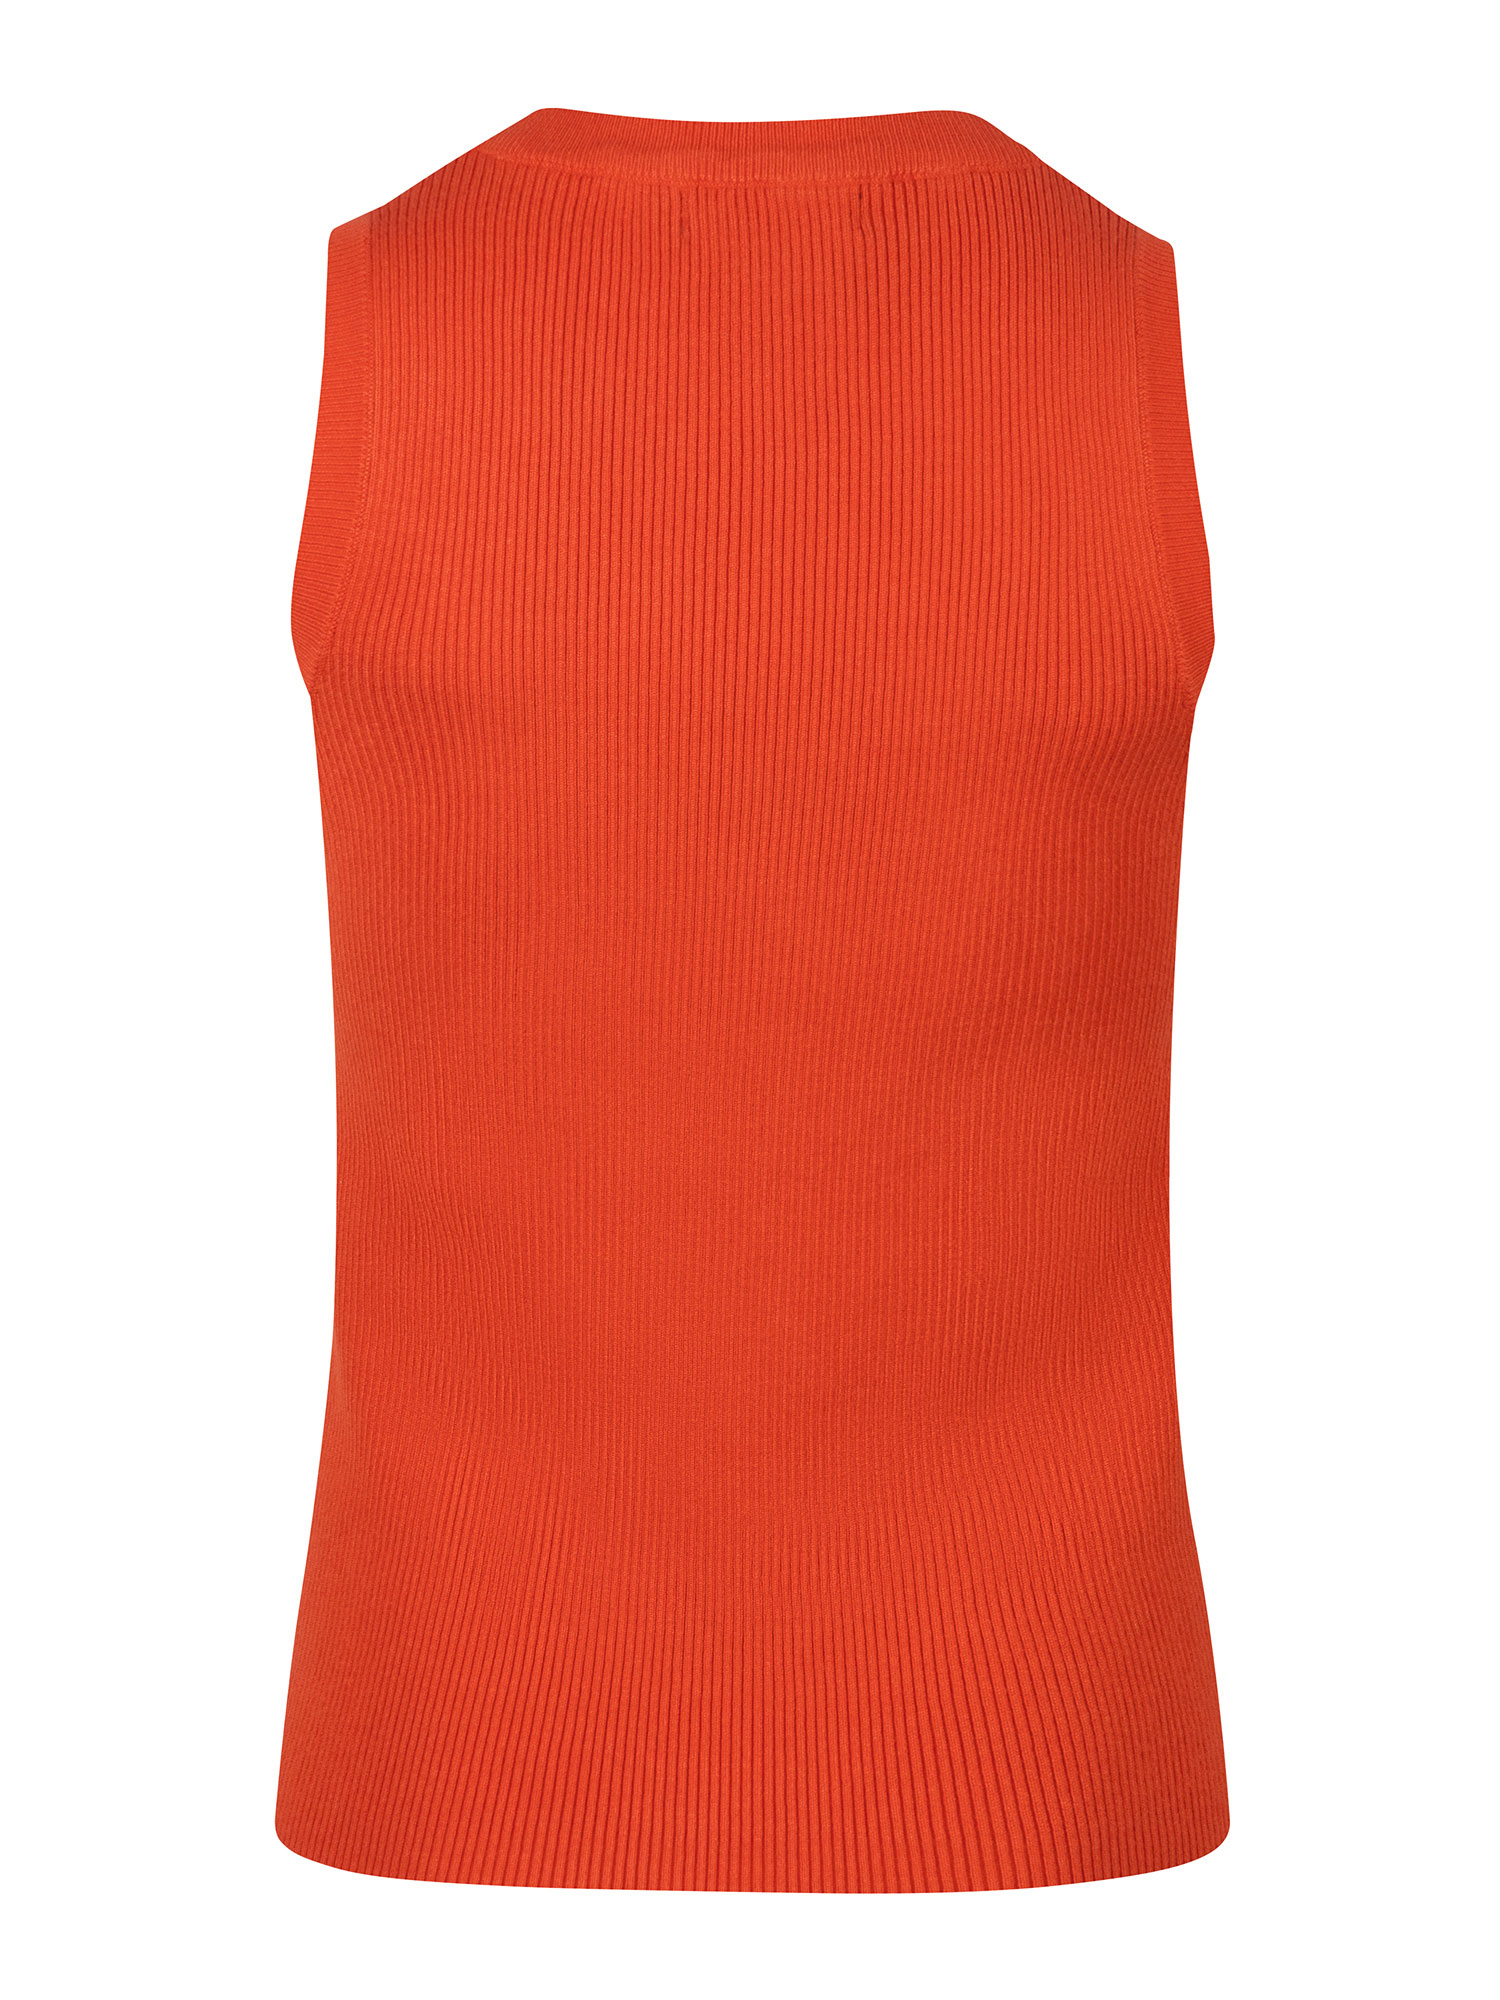 Ydence Knitted top Sarah Orange/red